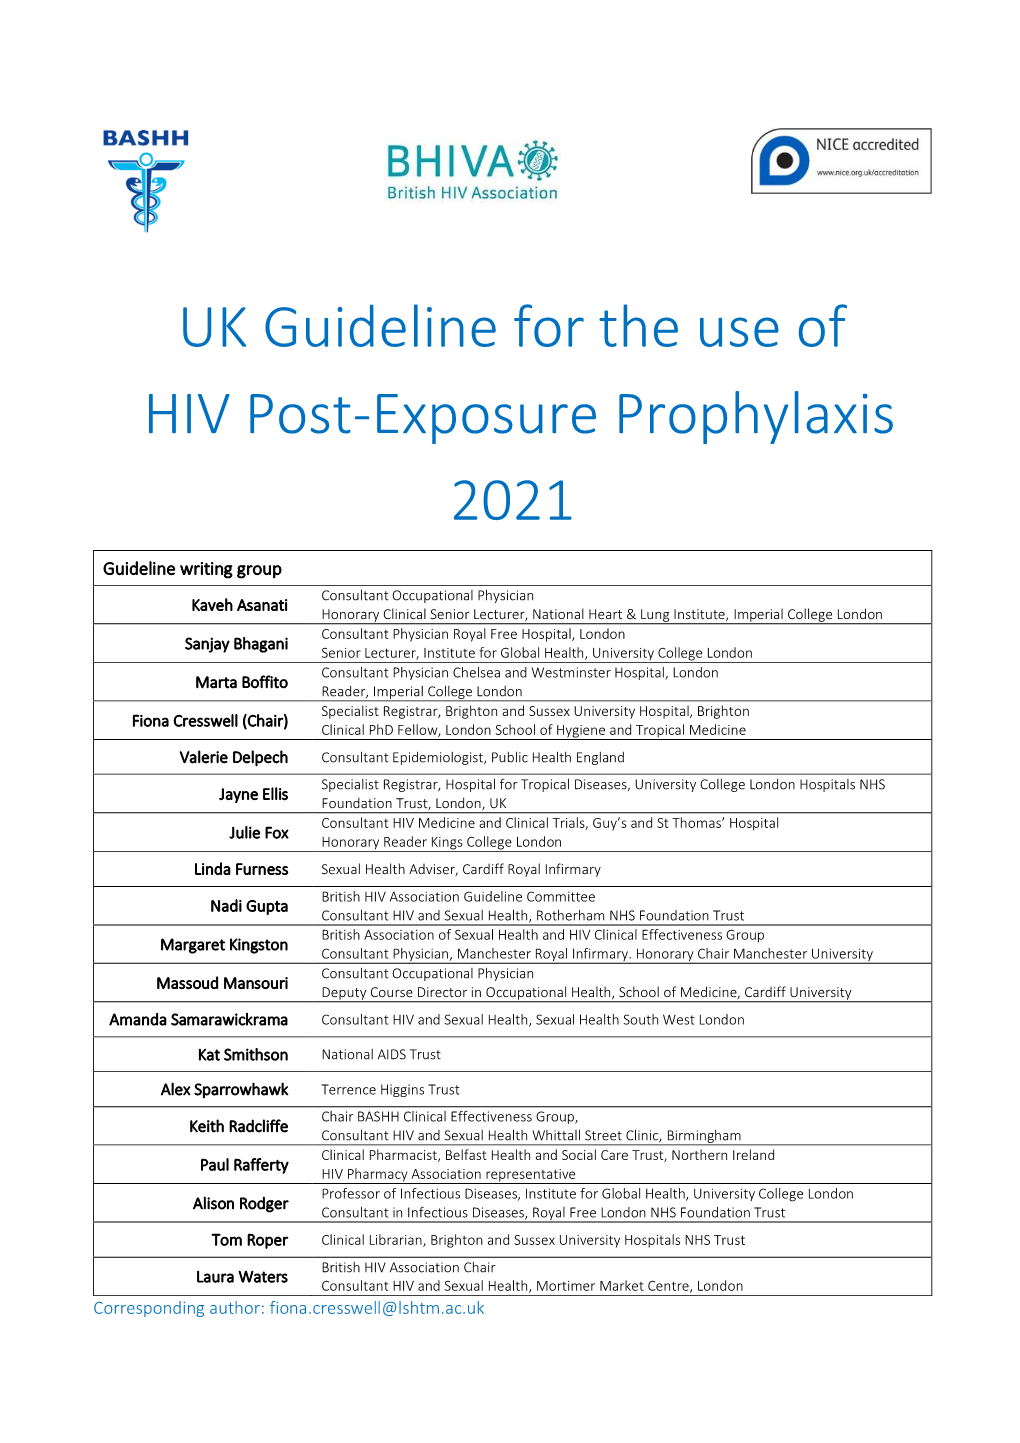 UK Guideline for the Use of HIV Post-Exposure Prophylaxis 2021